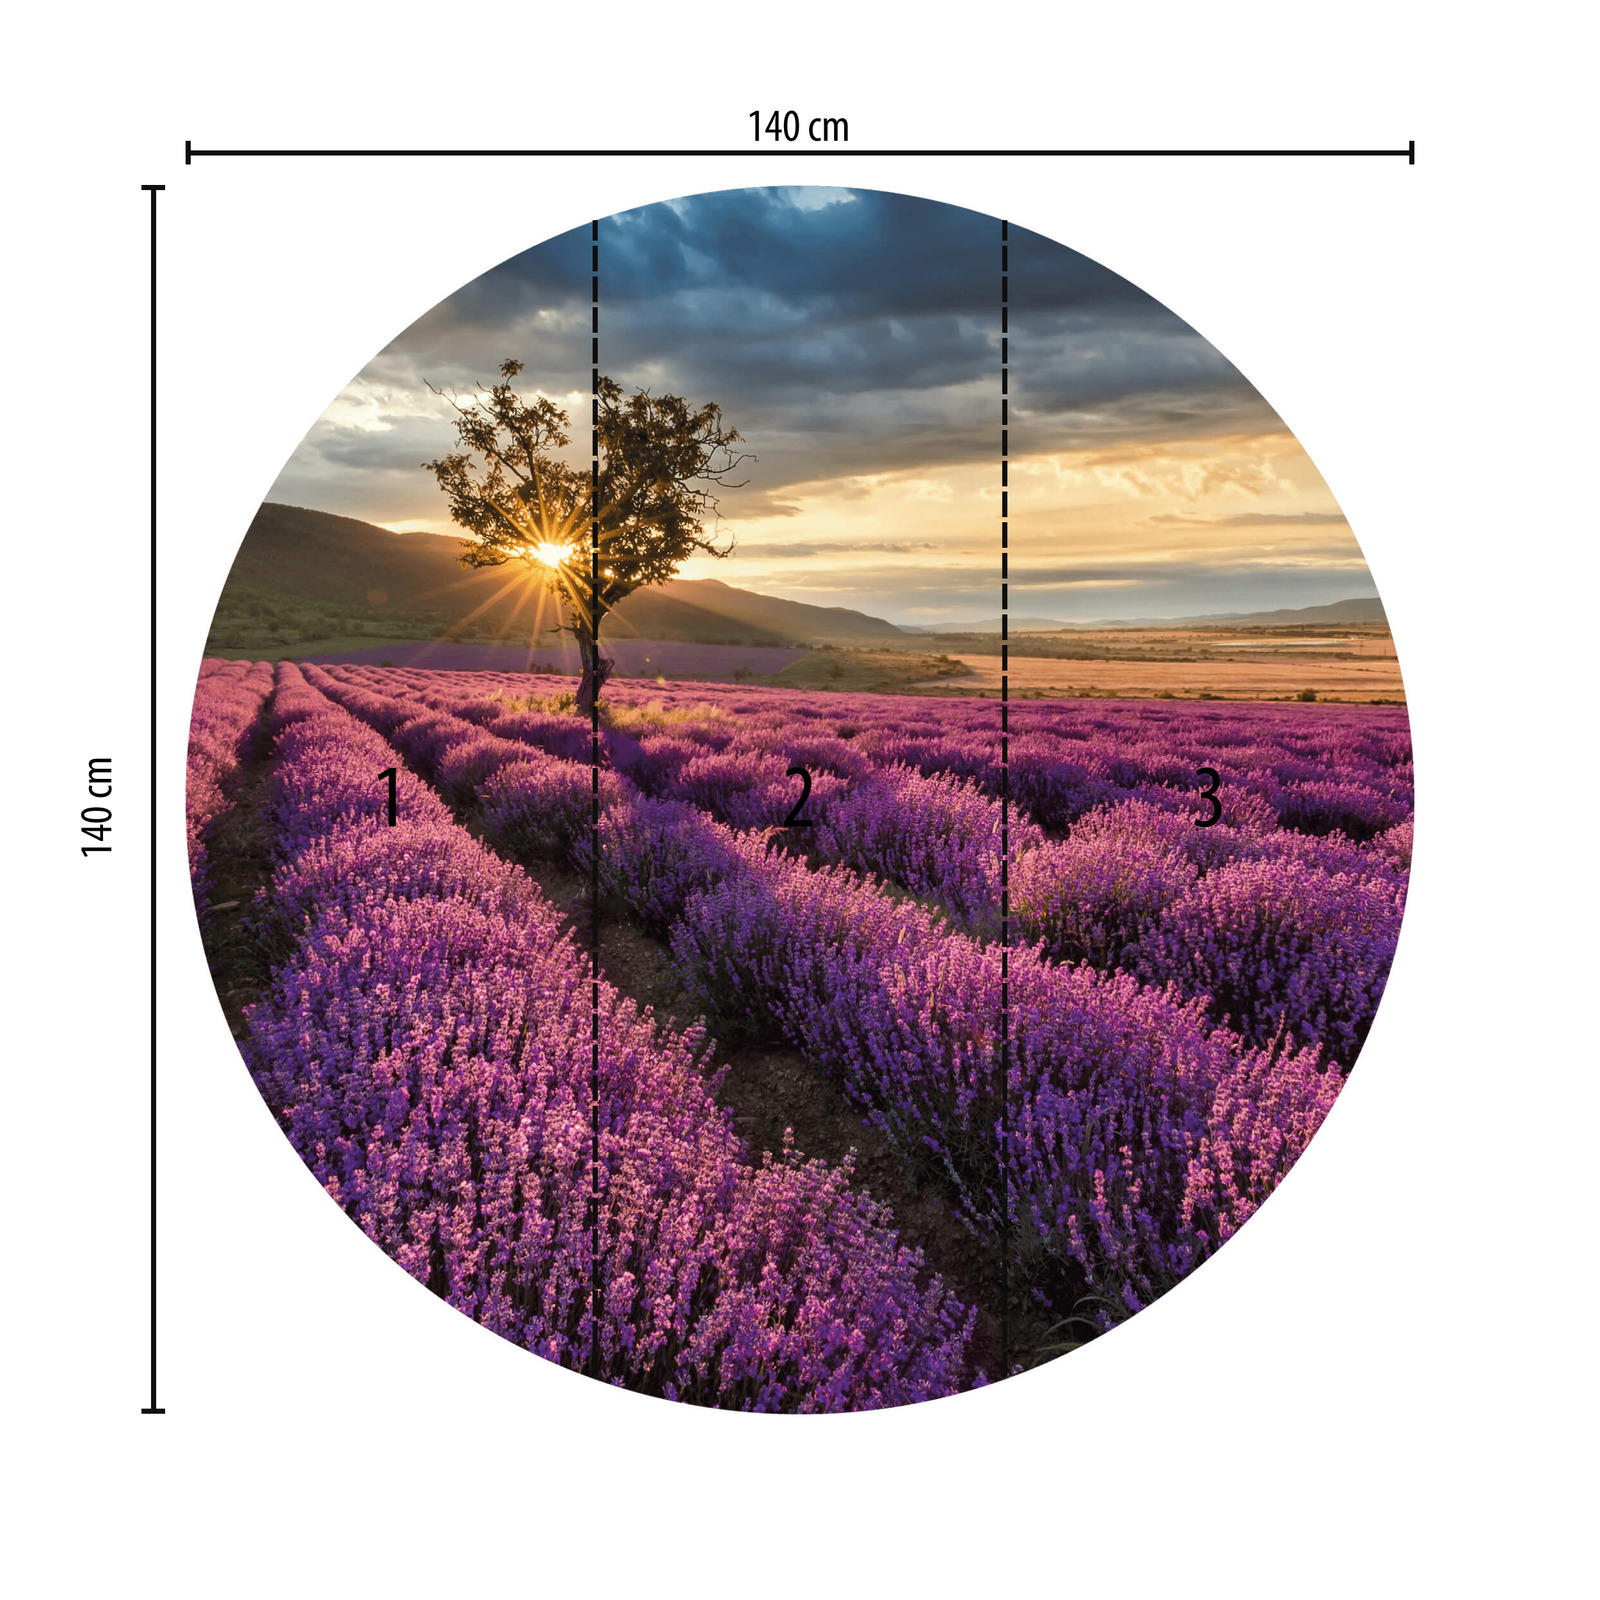             Photo wallpaper round lavender field in Provence
        